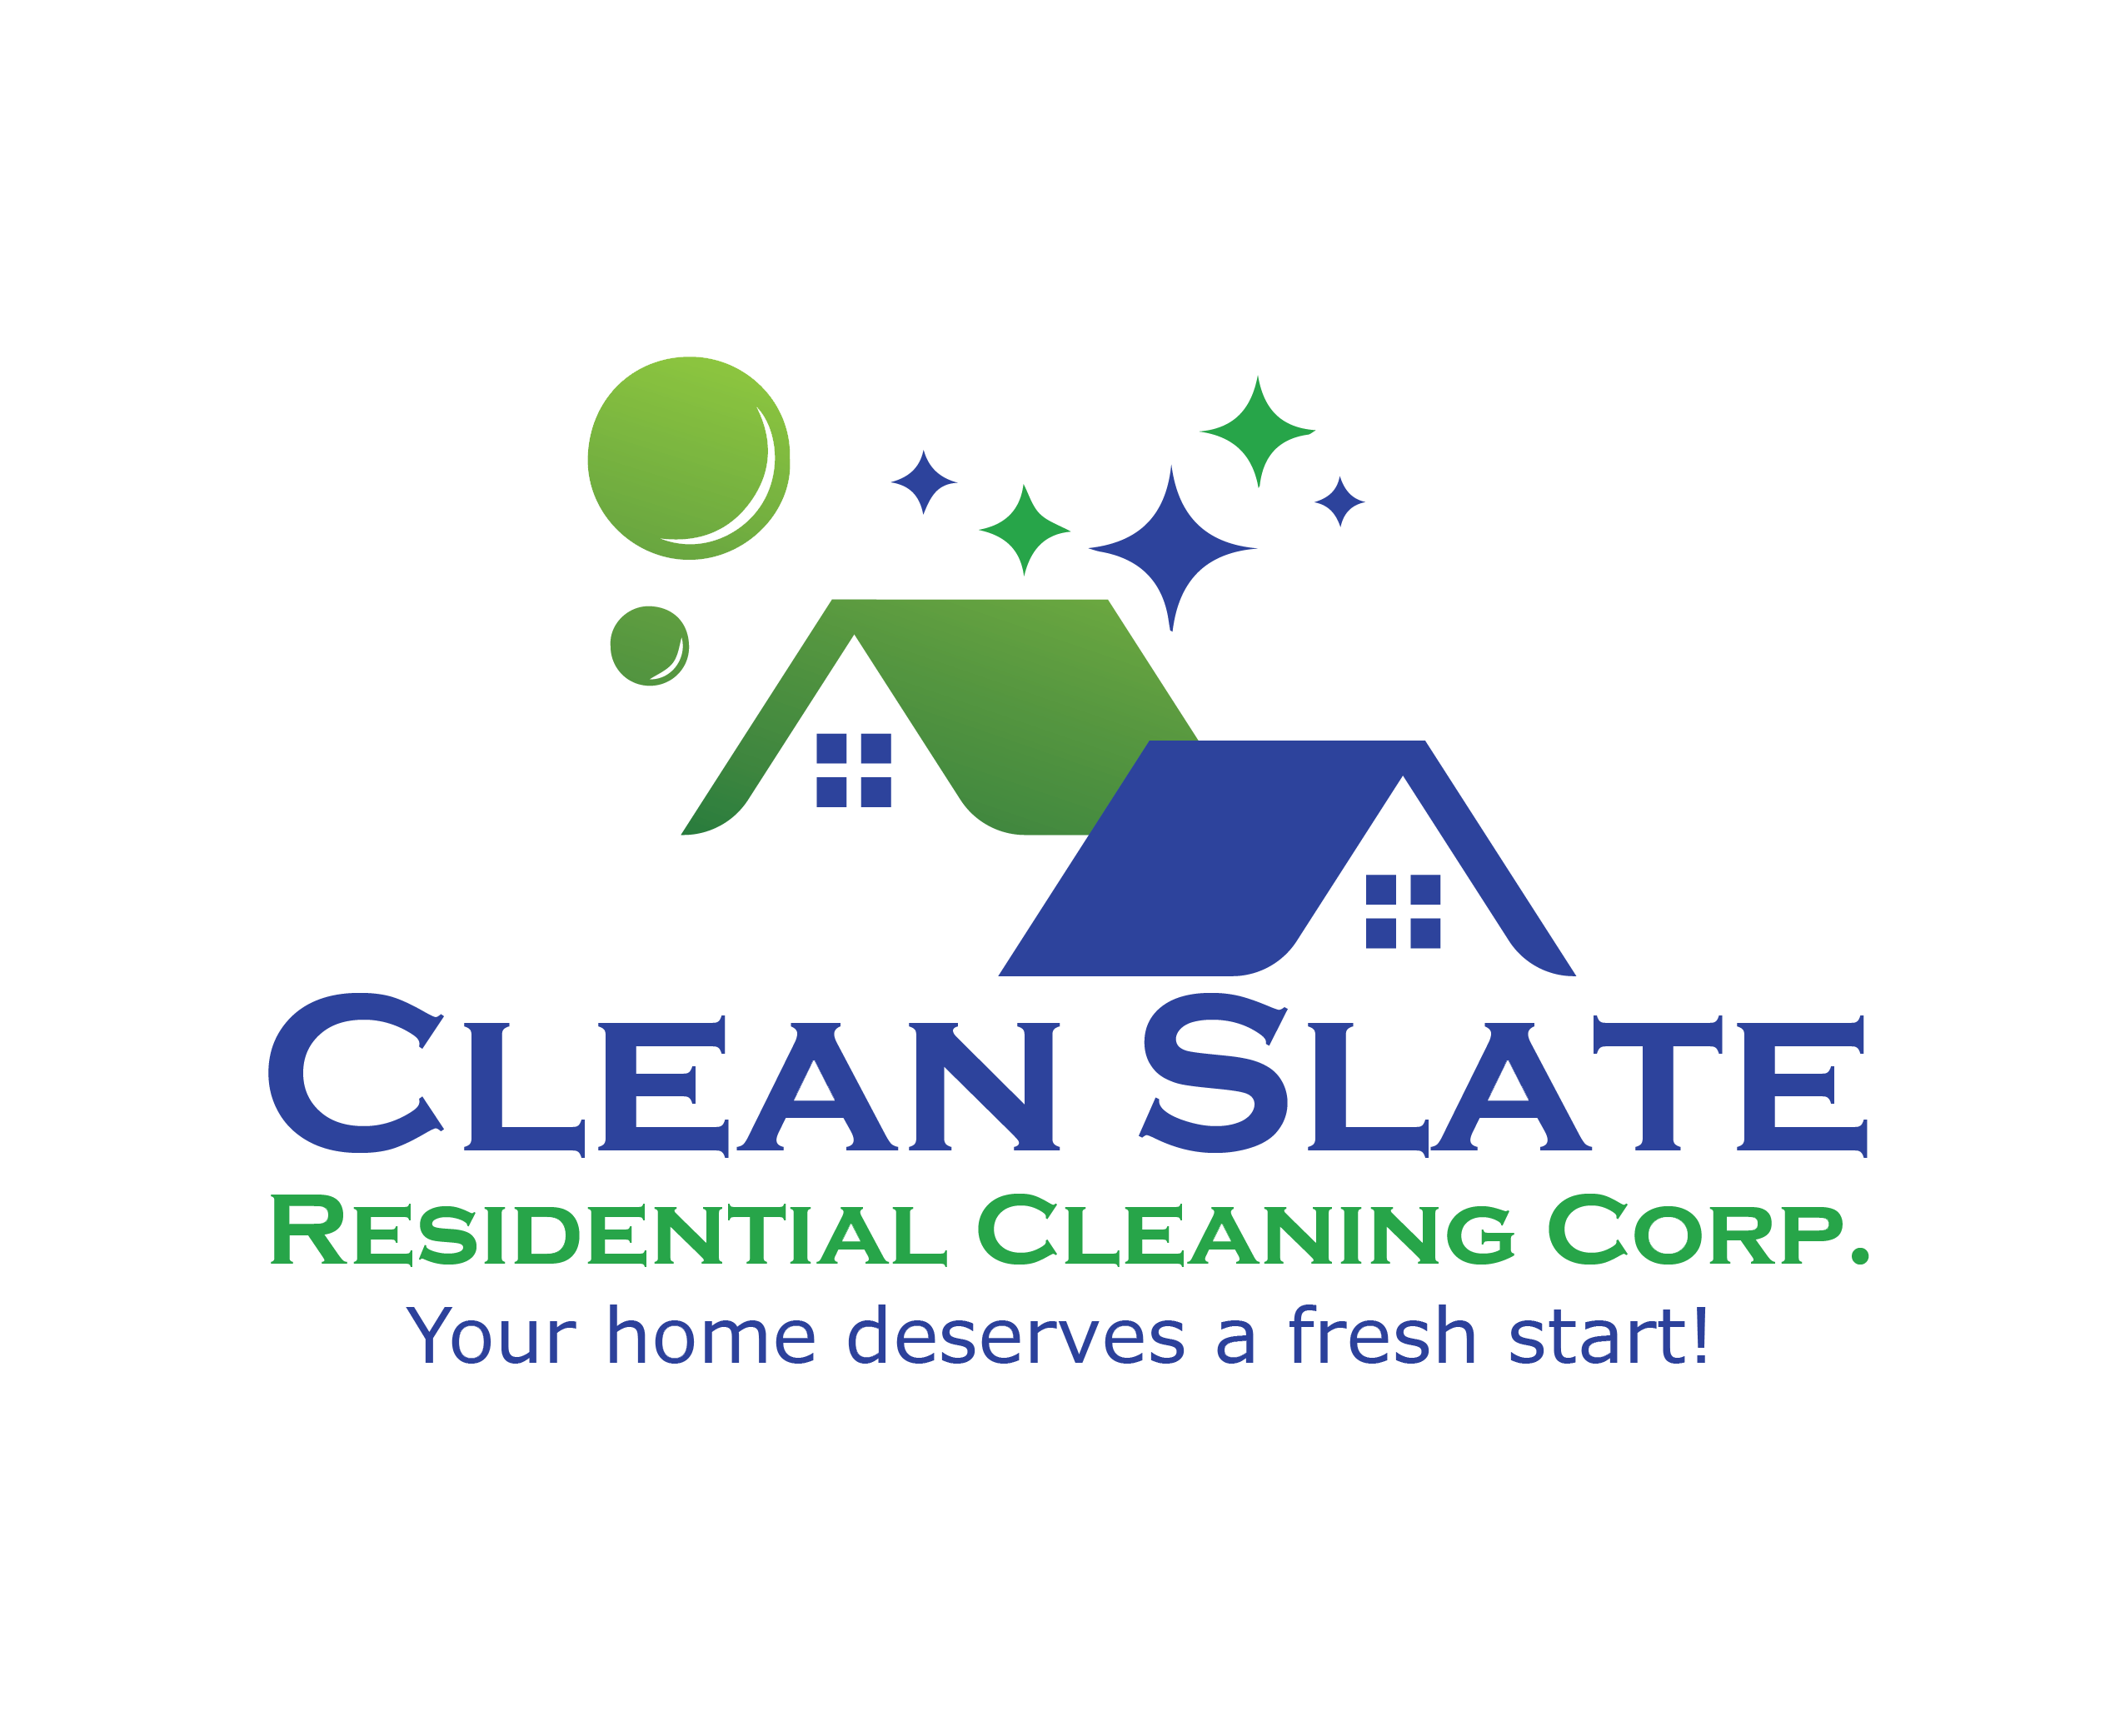 www.cleanslateresidentialcleaning.com